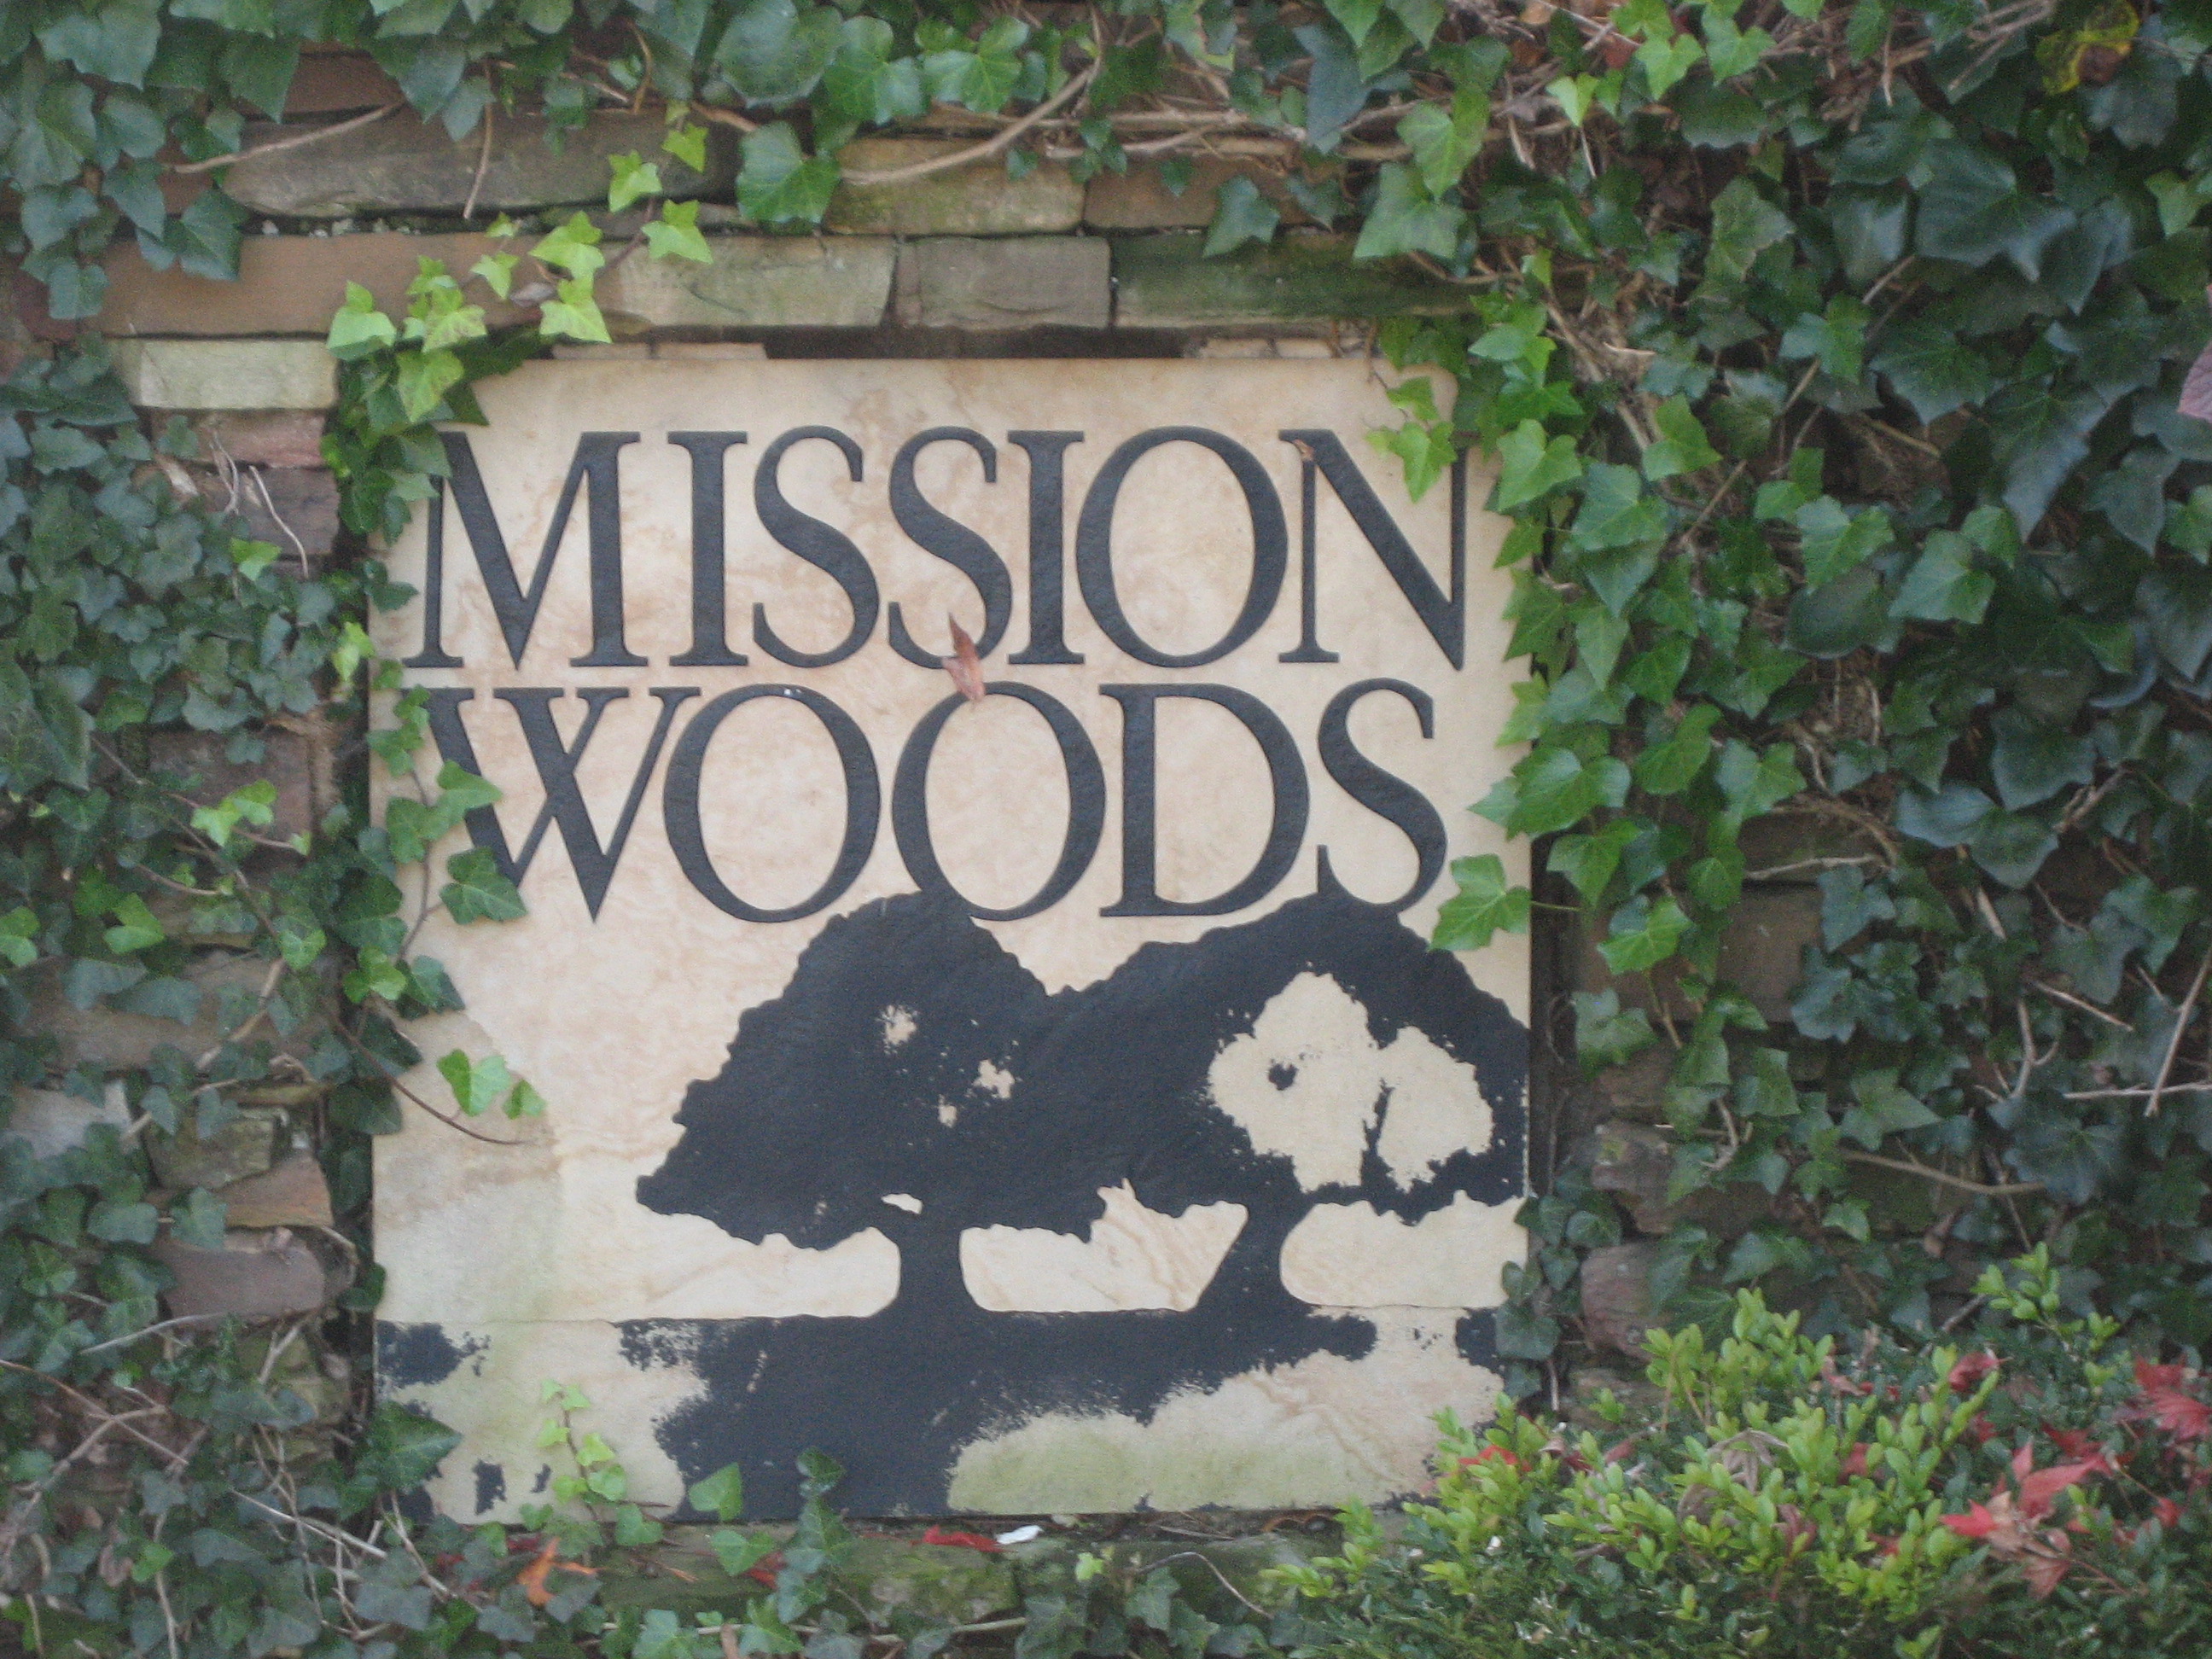 City of Mission Woods